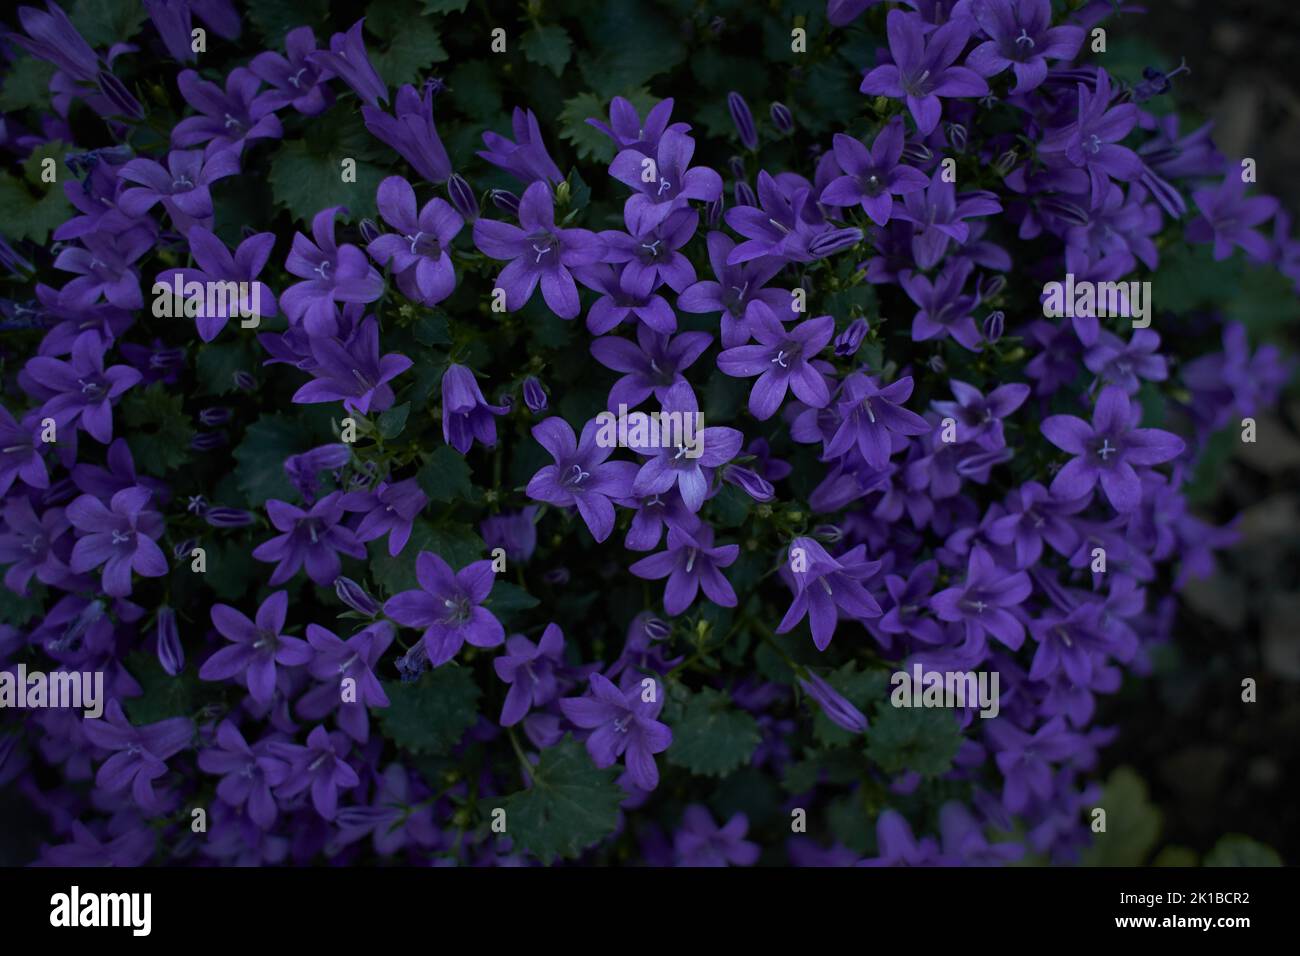 Purple flowers of Dalmatian bellflower or Adria bellflower or Wall bellflower (Campanula portenschlagiana) blooming on blurred background garden. lila Stock Photo